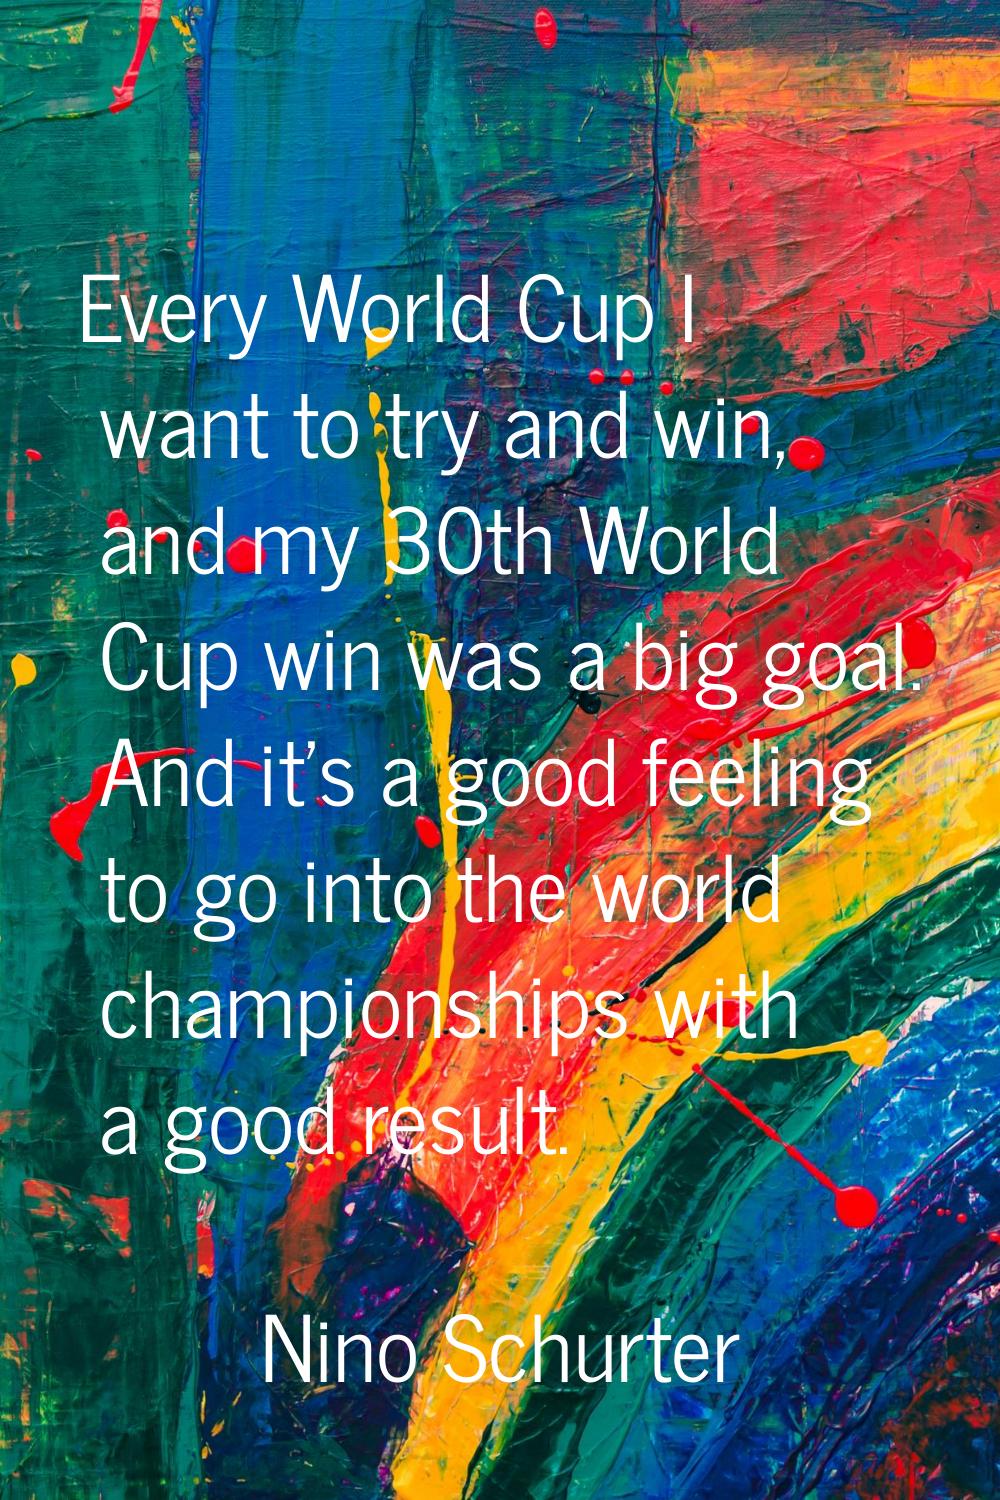 Every World Cup I want to try and win, and my 30th World Cup win was a big goal. And it's a good fe